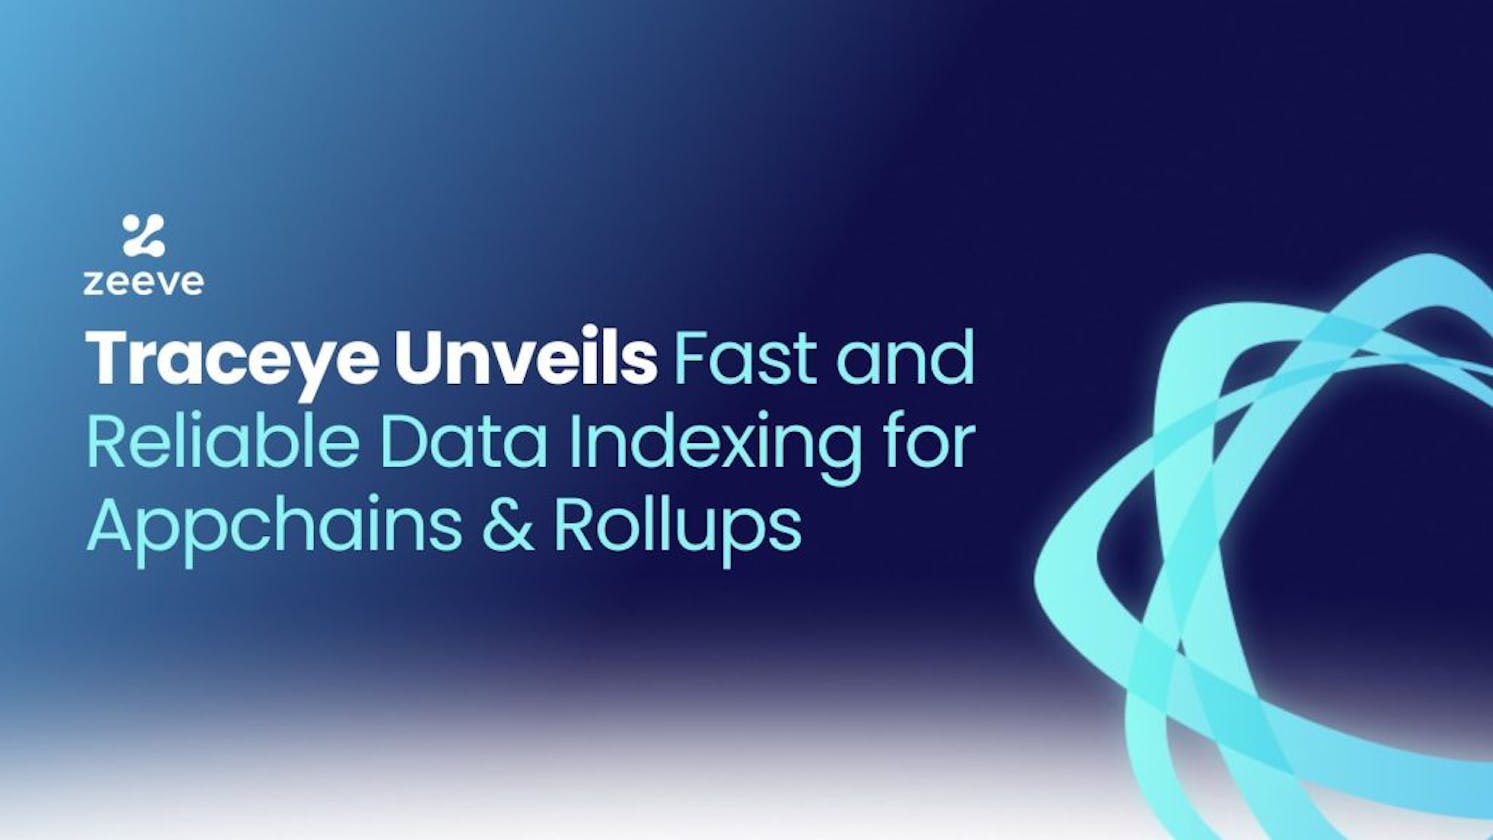 Traceye Unveils Fast and Reliable Data Indexing for Appchains & Rollups